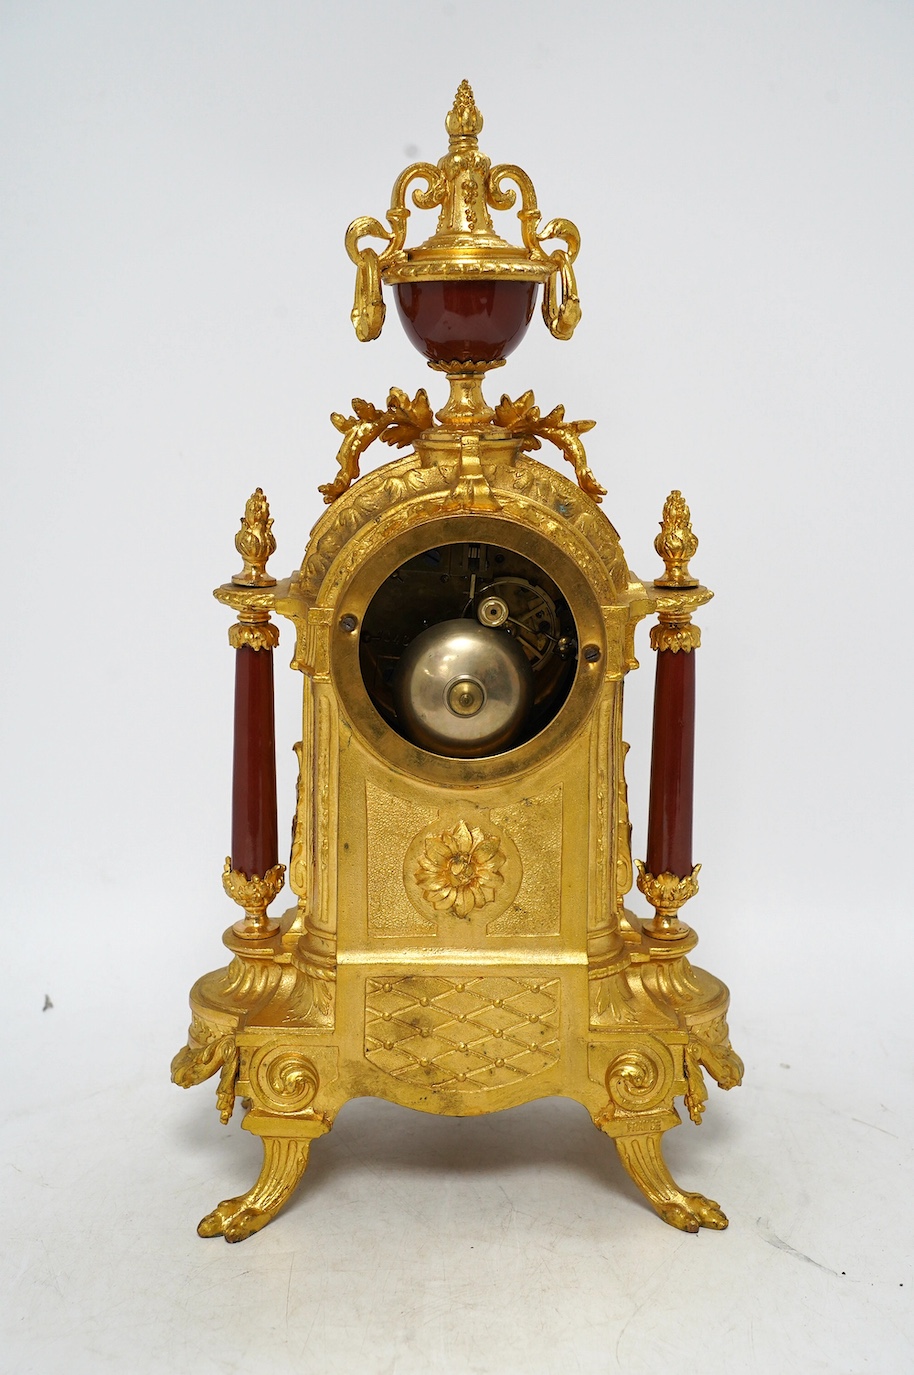 A 19th century French gilt spelter and porcelain mantel clock with pendulum, no key, 42cm. Condition - good, not tested as working